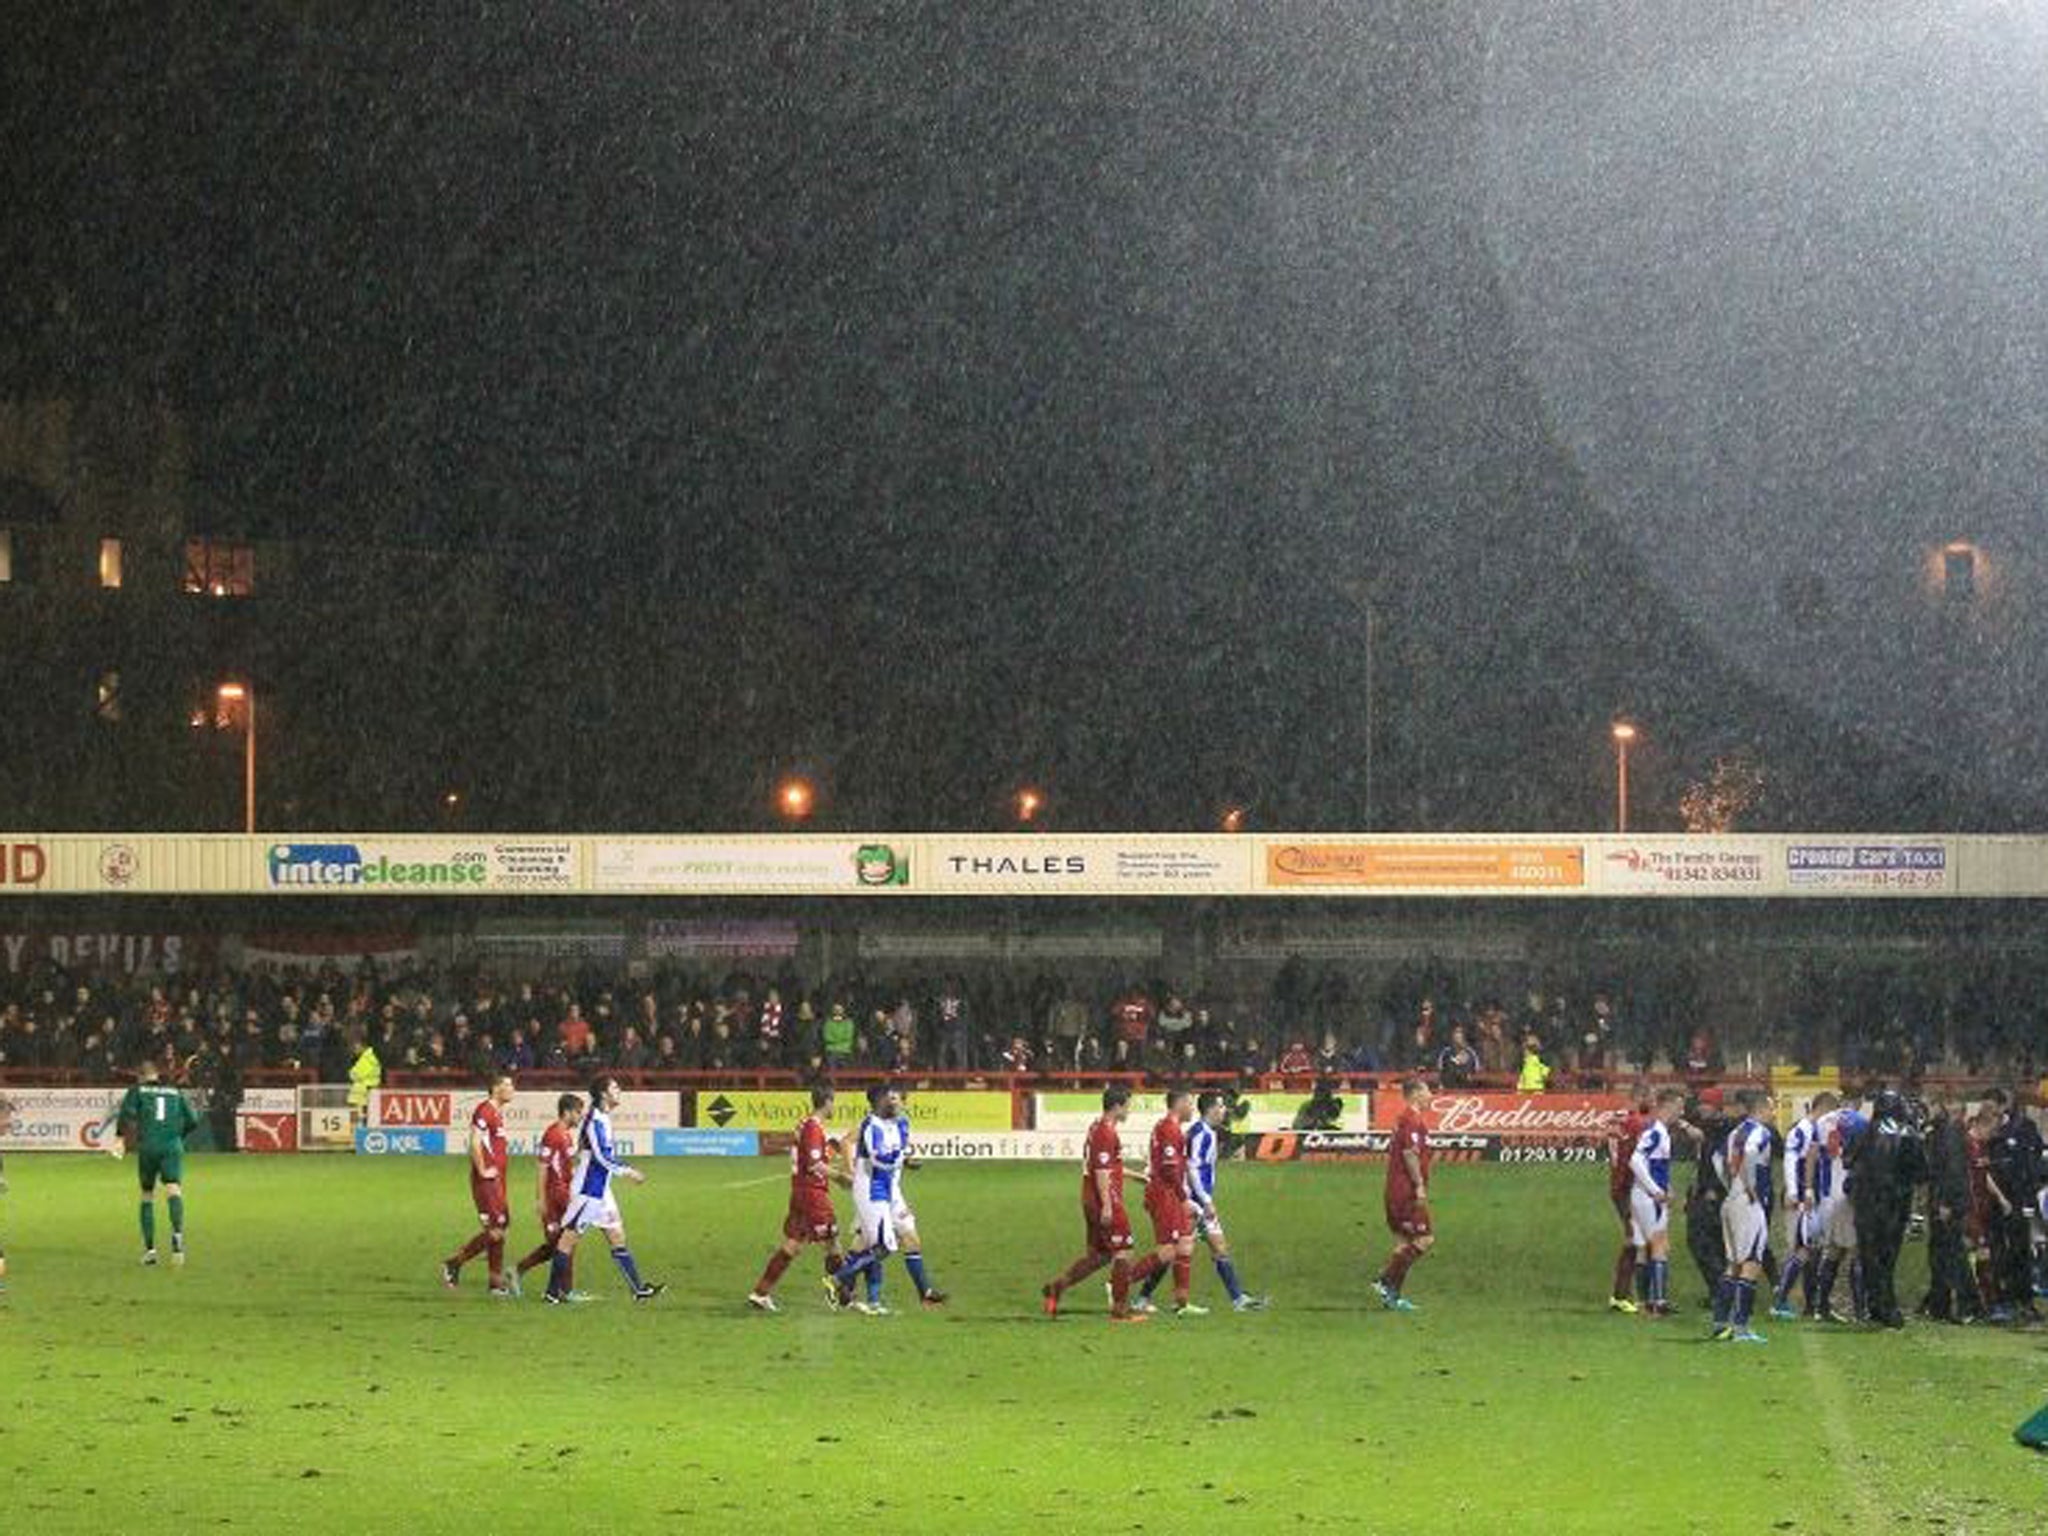 Crawley Town and Bristol Rovers players leave the pitch as the match is abandoned due to bad weather